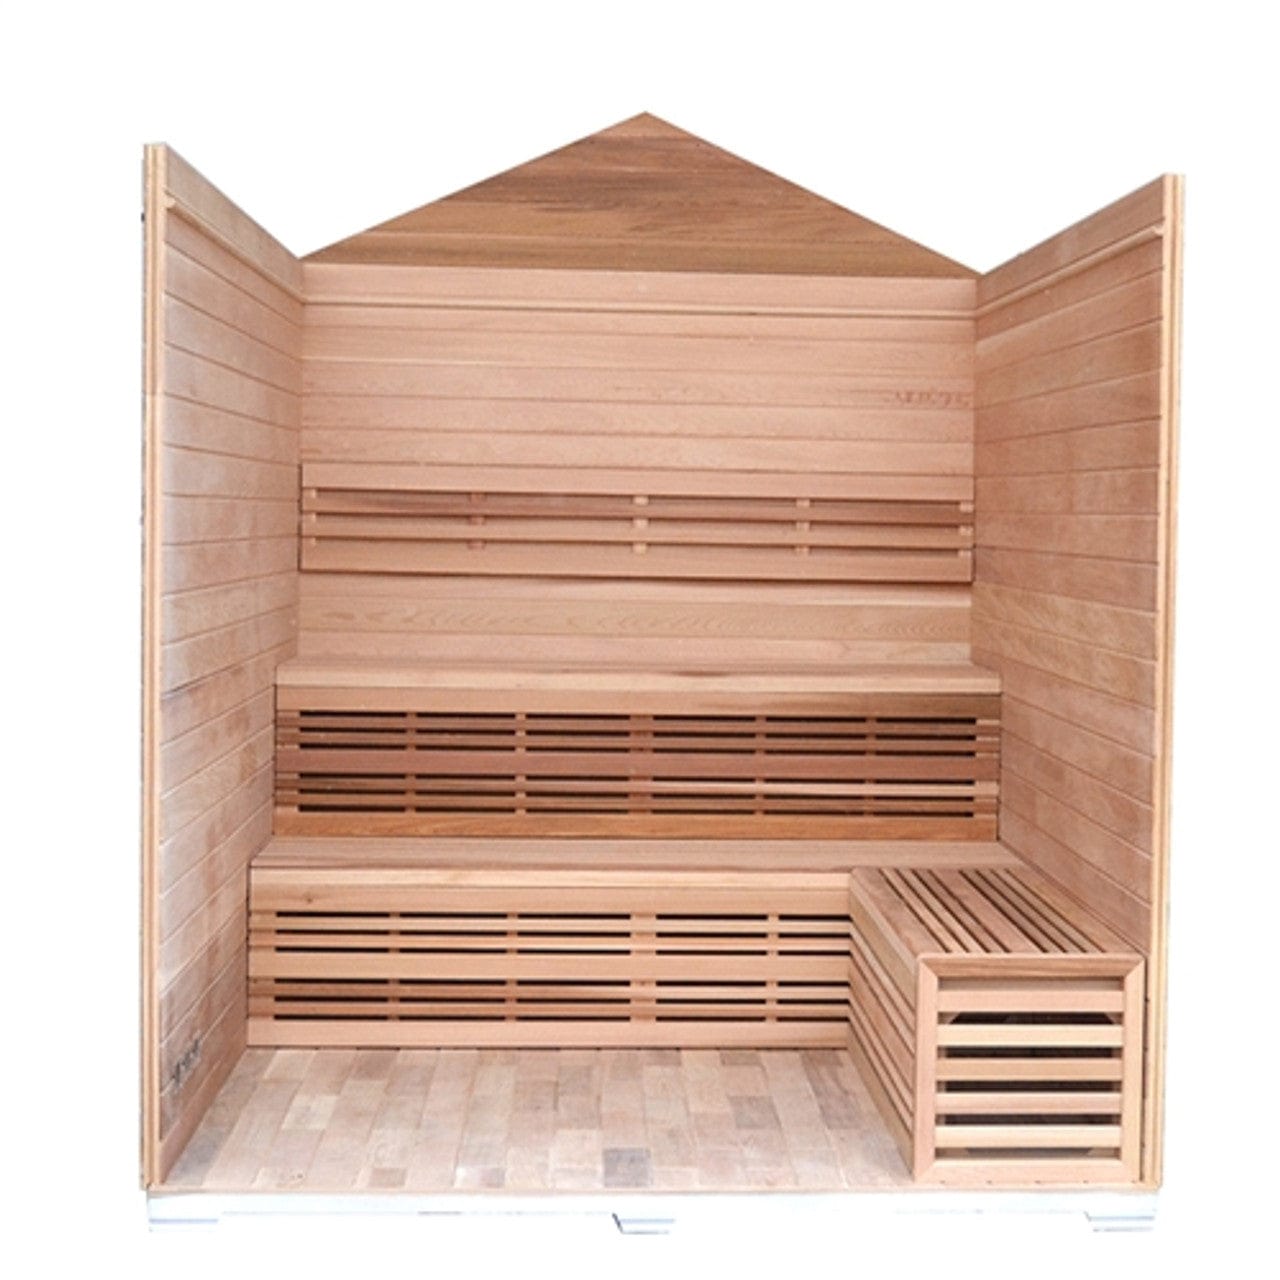 Aleko CED6PORI-AP Outdoor 6-Person Wet / Dry Sauna - Canadian Red Cedar Wood with Stone Finish